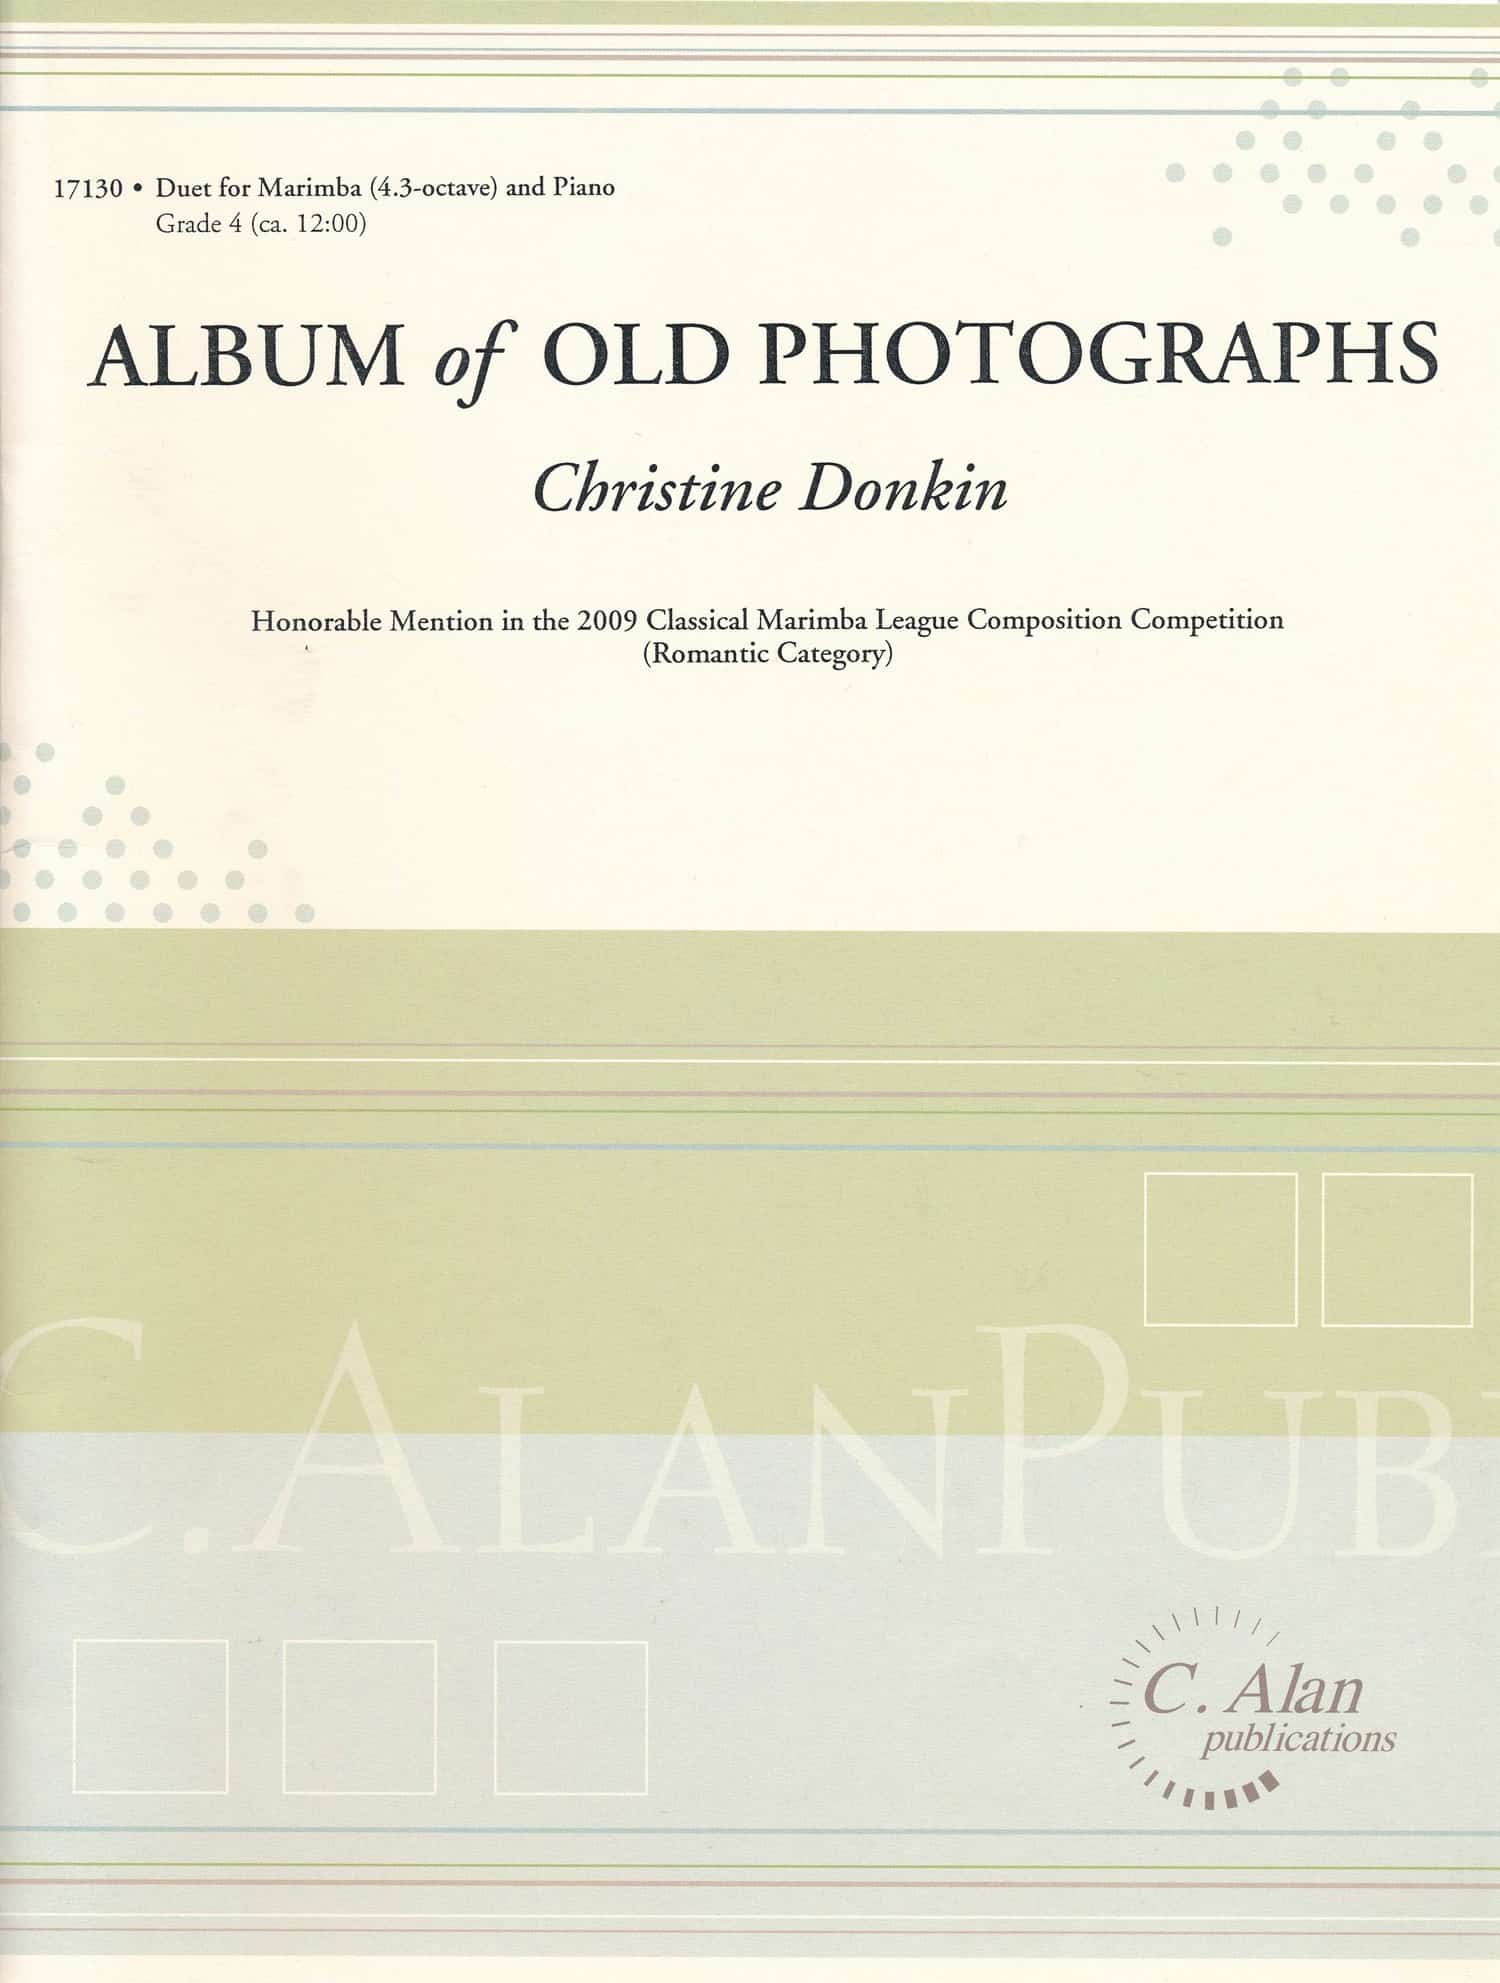 Album of Old Photographs by Christine Donkin